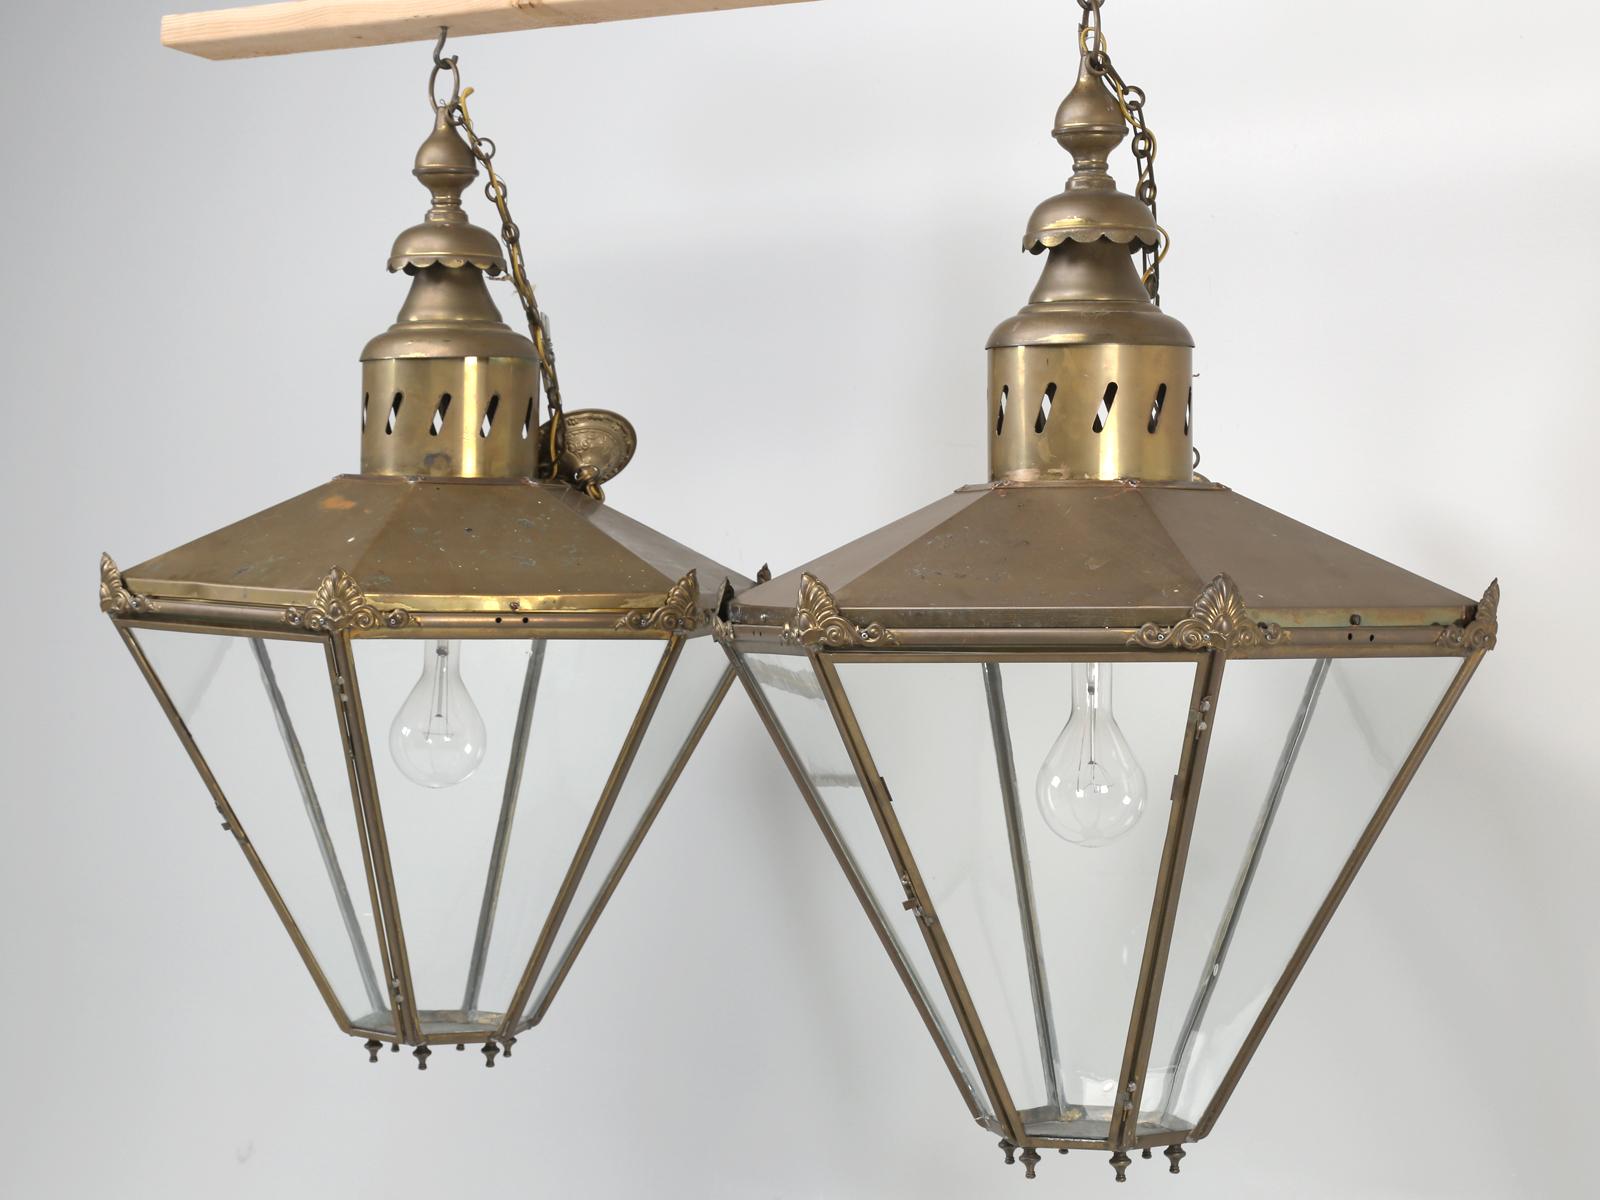 Pair of antique French or English, very large brass lanterns. Although we purchased this pair of antique brass lanterns in France, there is a part of us, that thinks they could have originated in England? What we find most unusual about this pair of